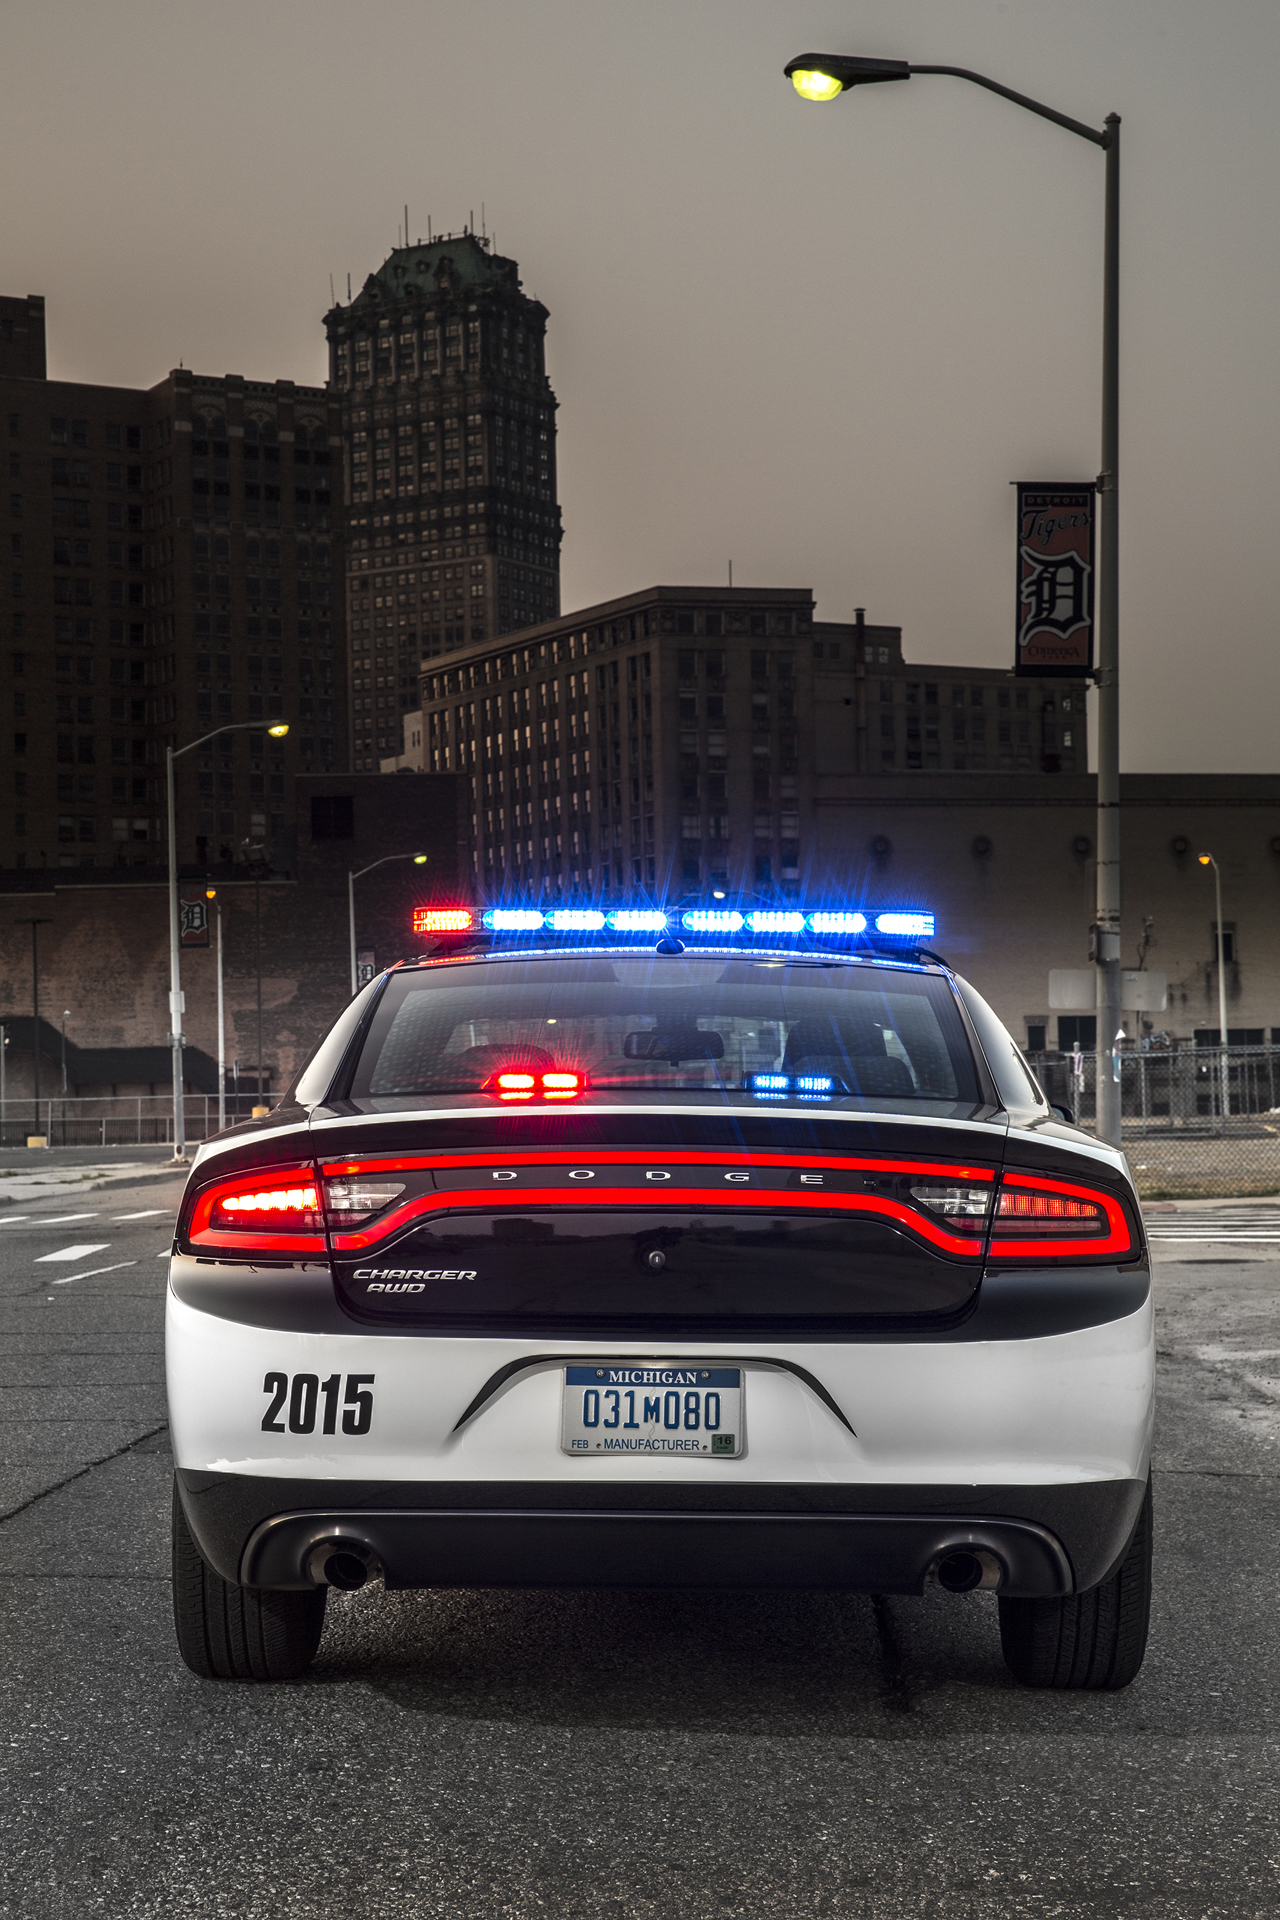 2015 Dodge Police Charger Pursuit Is Ready To Serve And Protect 370hp Awd